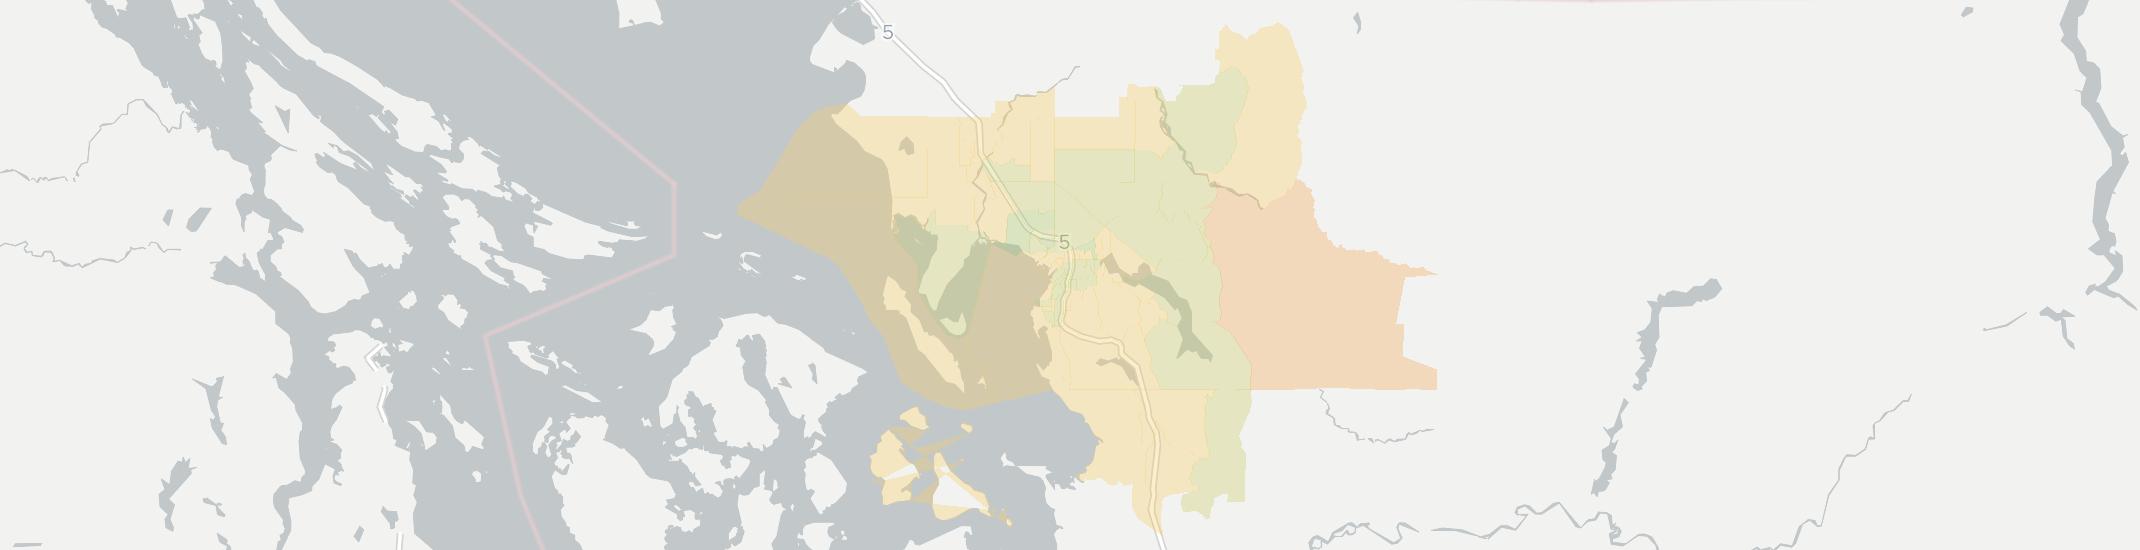 Bellingham Internet Competition Map. Click for interactive map.